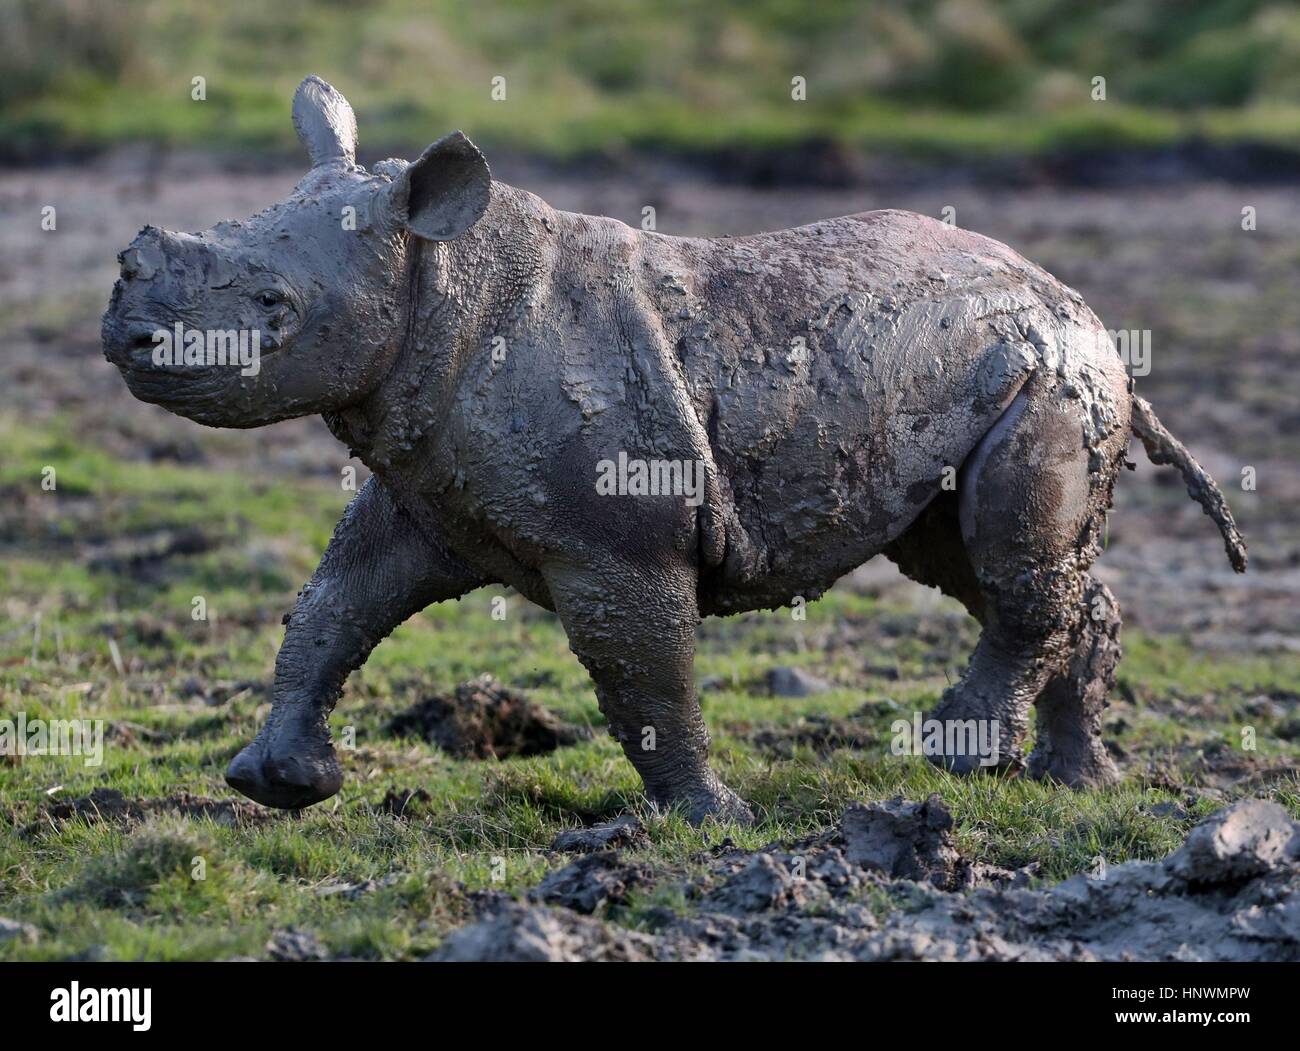 Rukuru, a baby rhino born December 2016 explores her enclosure after taking a mud bath at Port Lympne Reserve with her mother Nyasa after spending the last month keeping warm with her mother in their indoor enclosures. Stock Photo